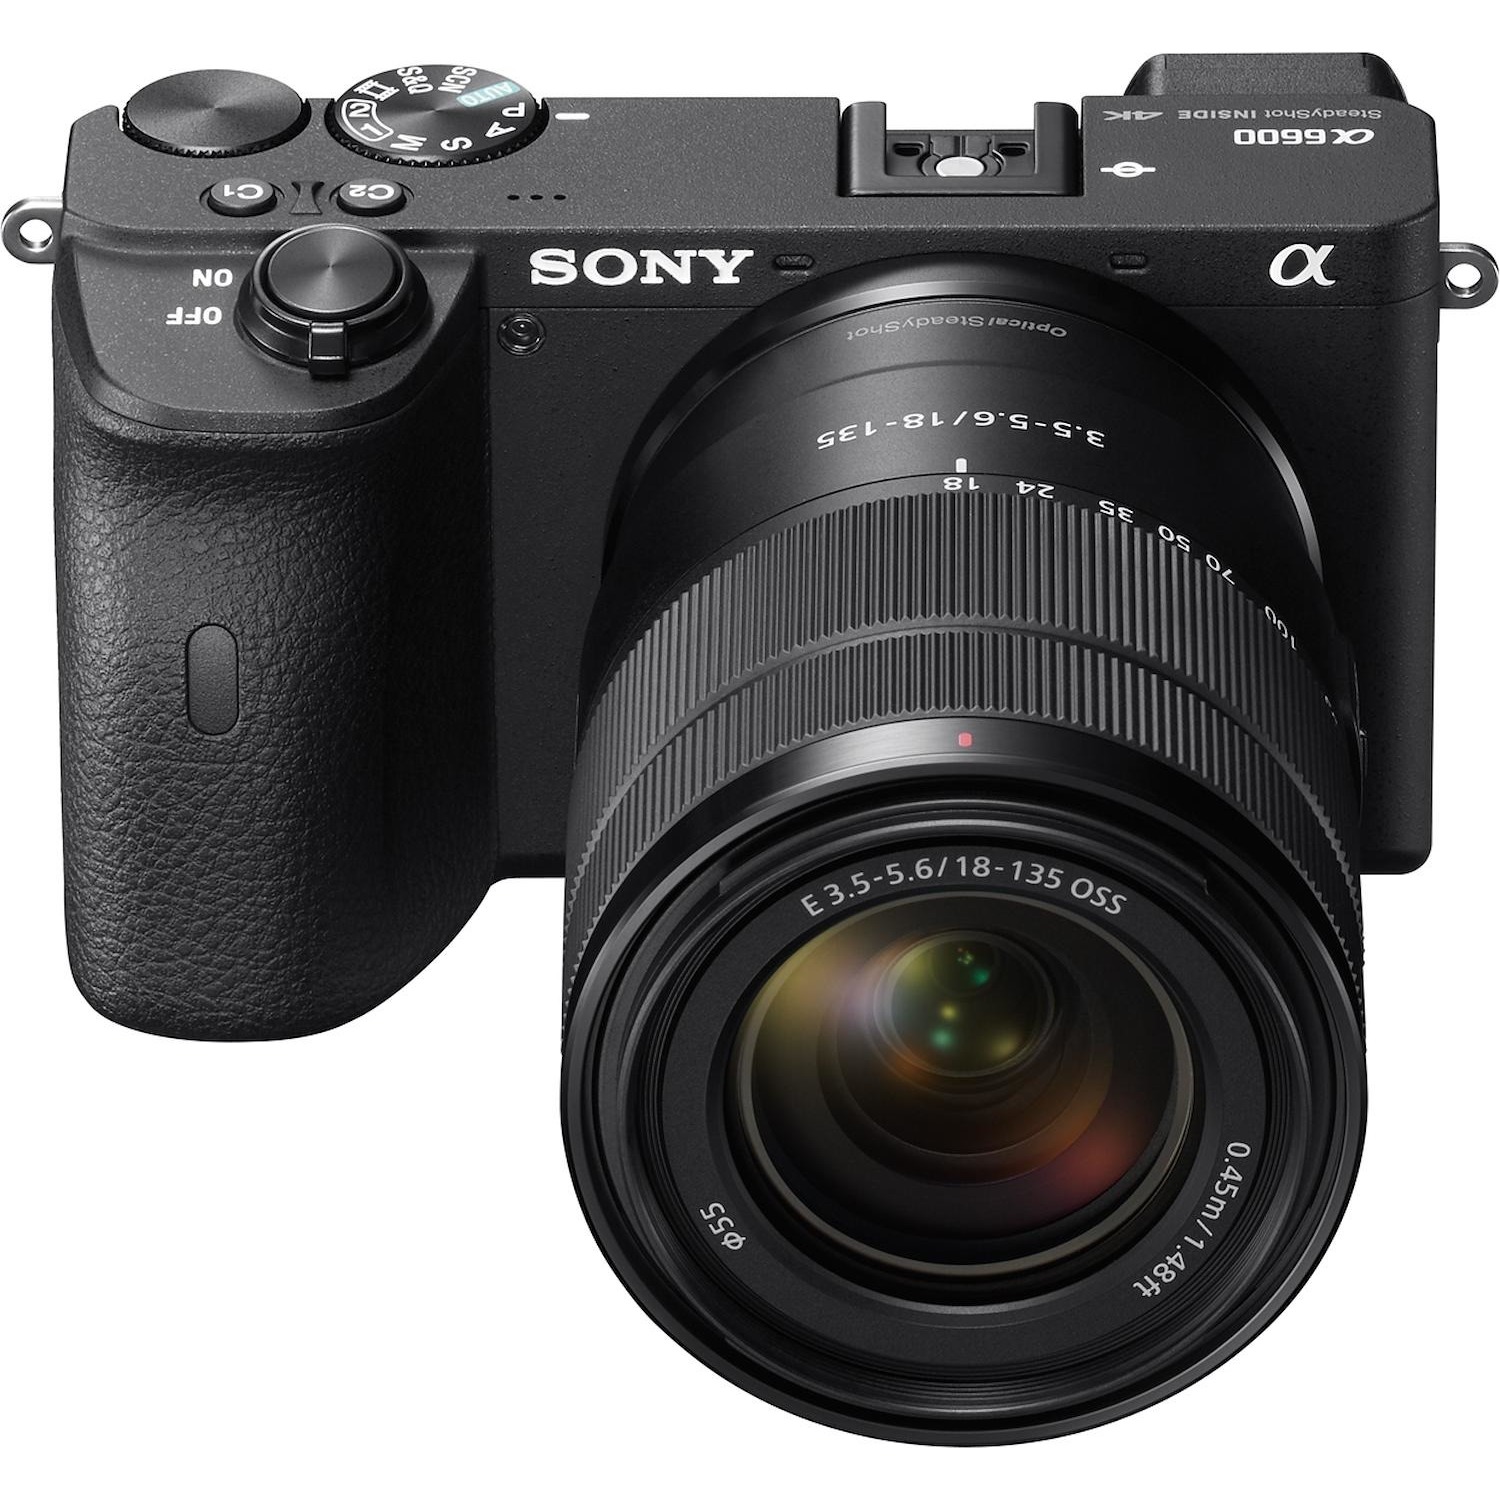 Sony ? ILCE6600MB + 18-135mm Kit fotocamere SLR 24,2 MP CMOS 6000 x 4000 Pixel Nero